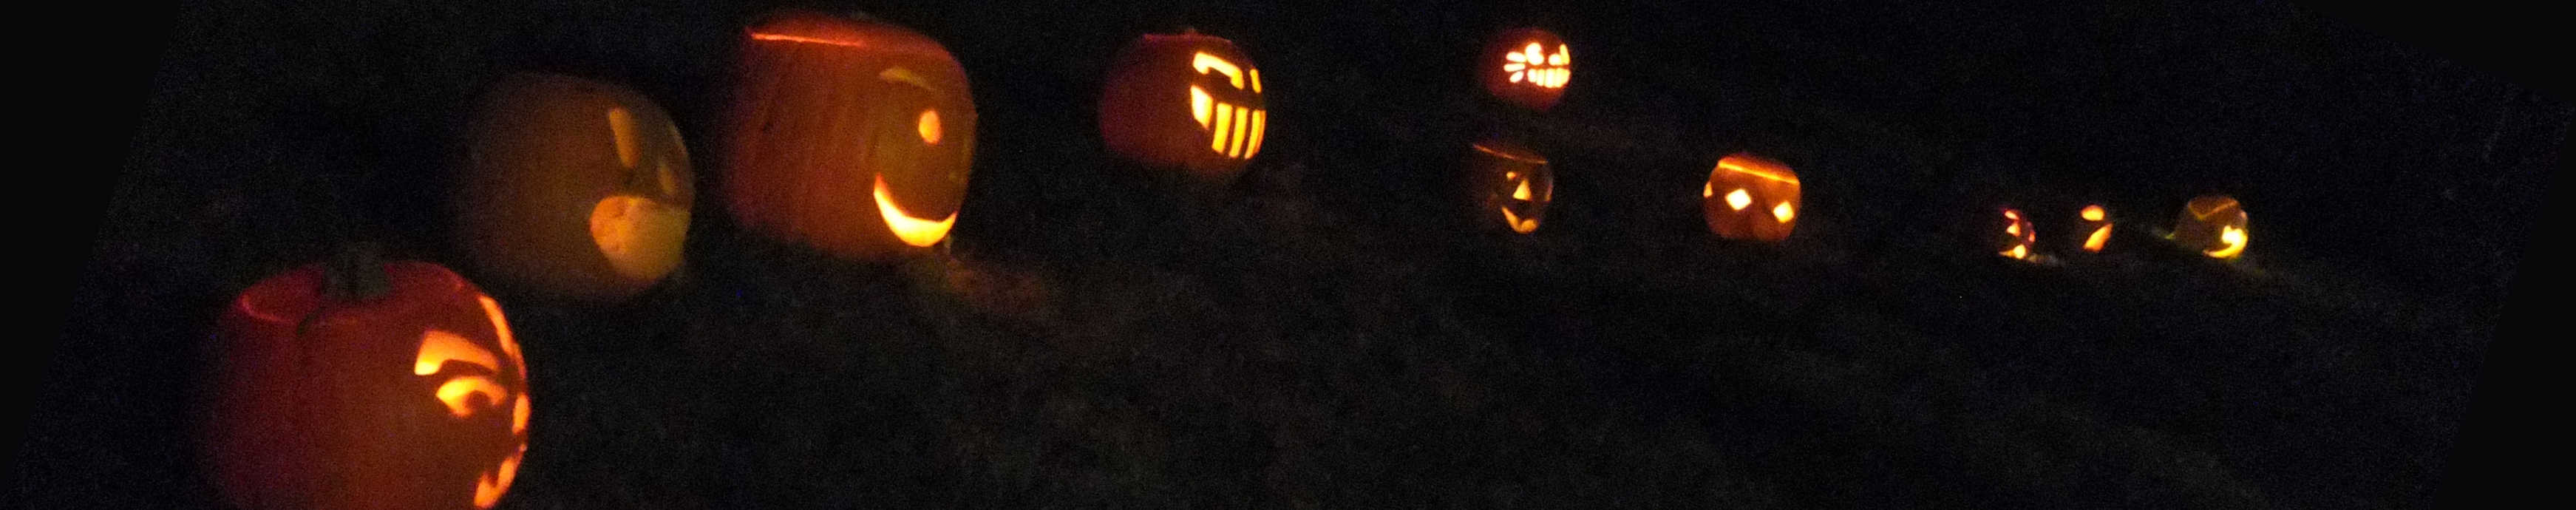 Glowing Pumpkins All In A Row